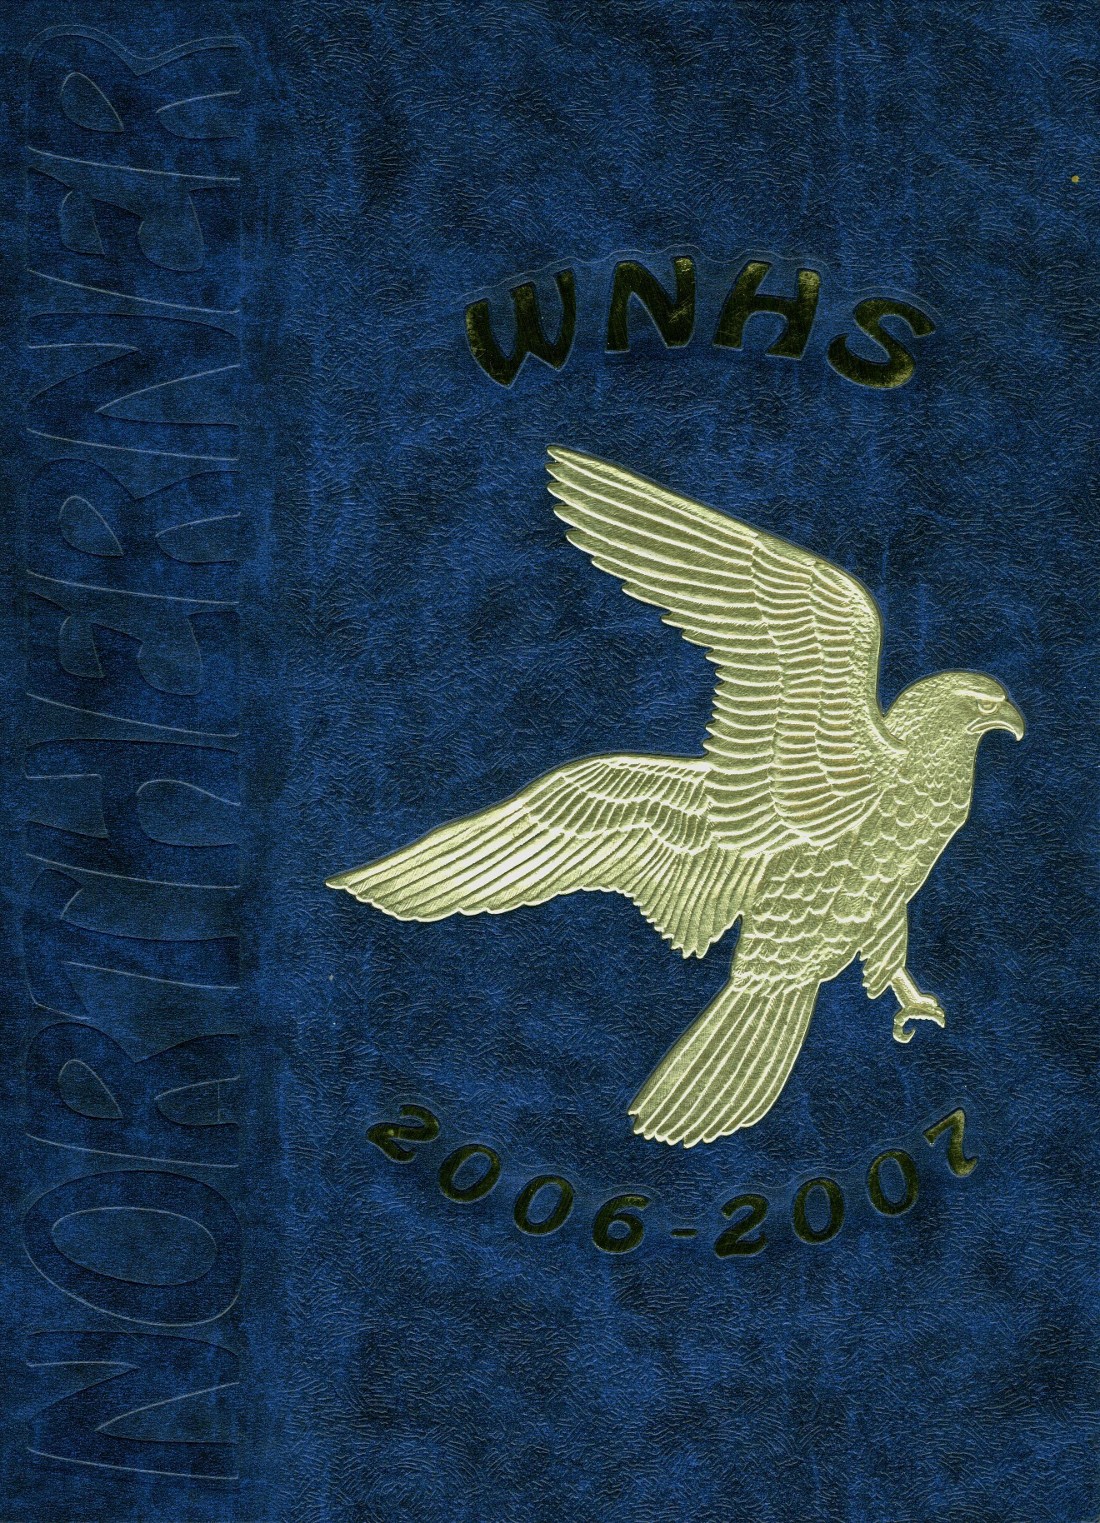 2007 yearbook from Wheaton North High School from Wheaton, Illinois for ...